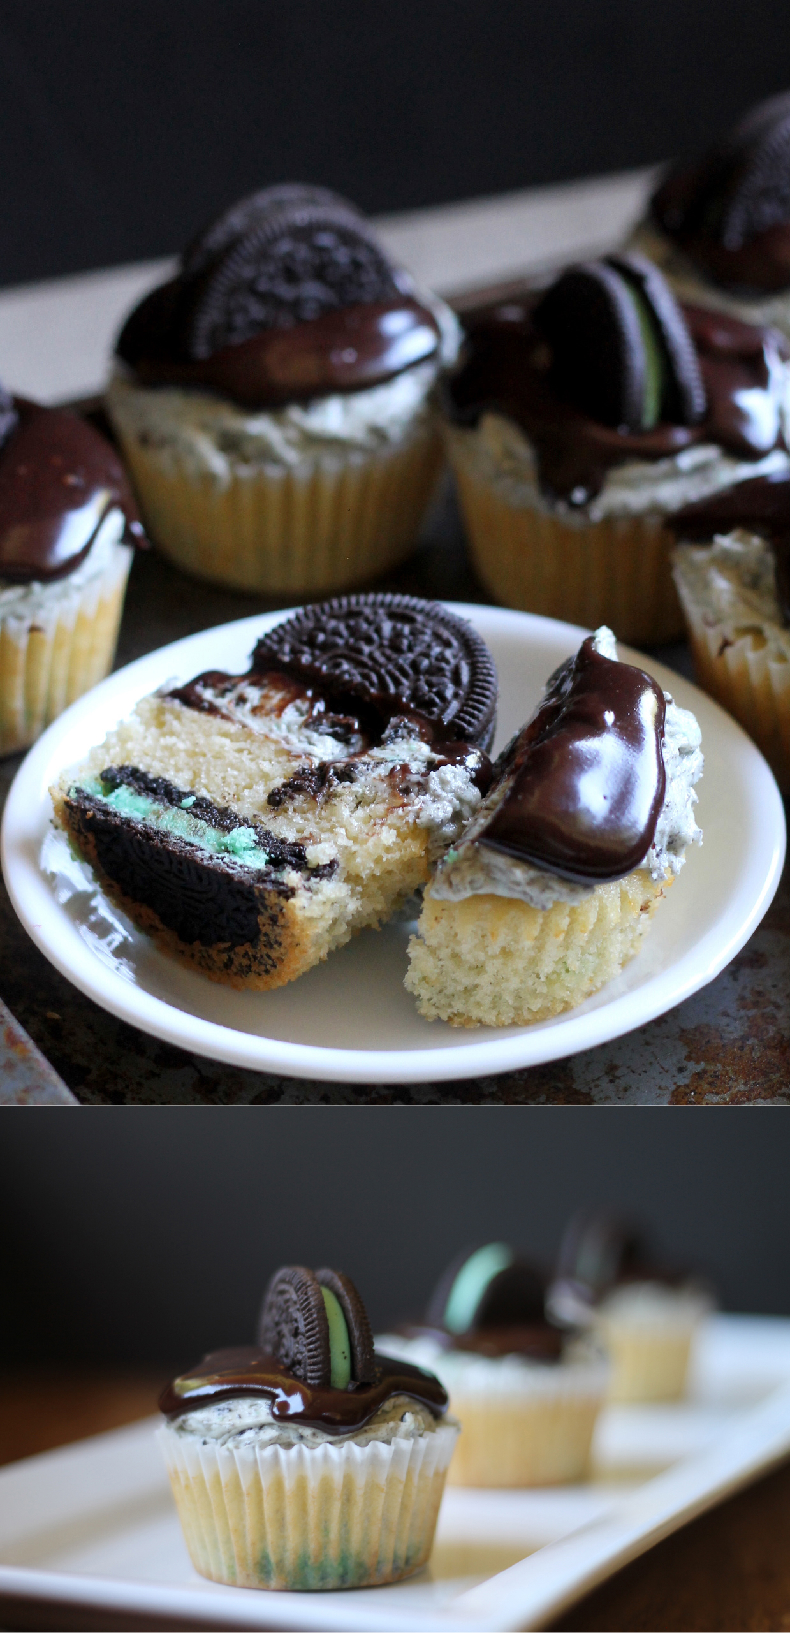 These Mint Cookies & Cream Cupcakes feature a vanilla cupcake with a Mint Oreo at the bottom, creamy crunchy Mint Oreo buttercream, & chocolate ganache.